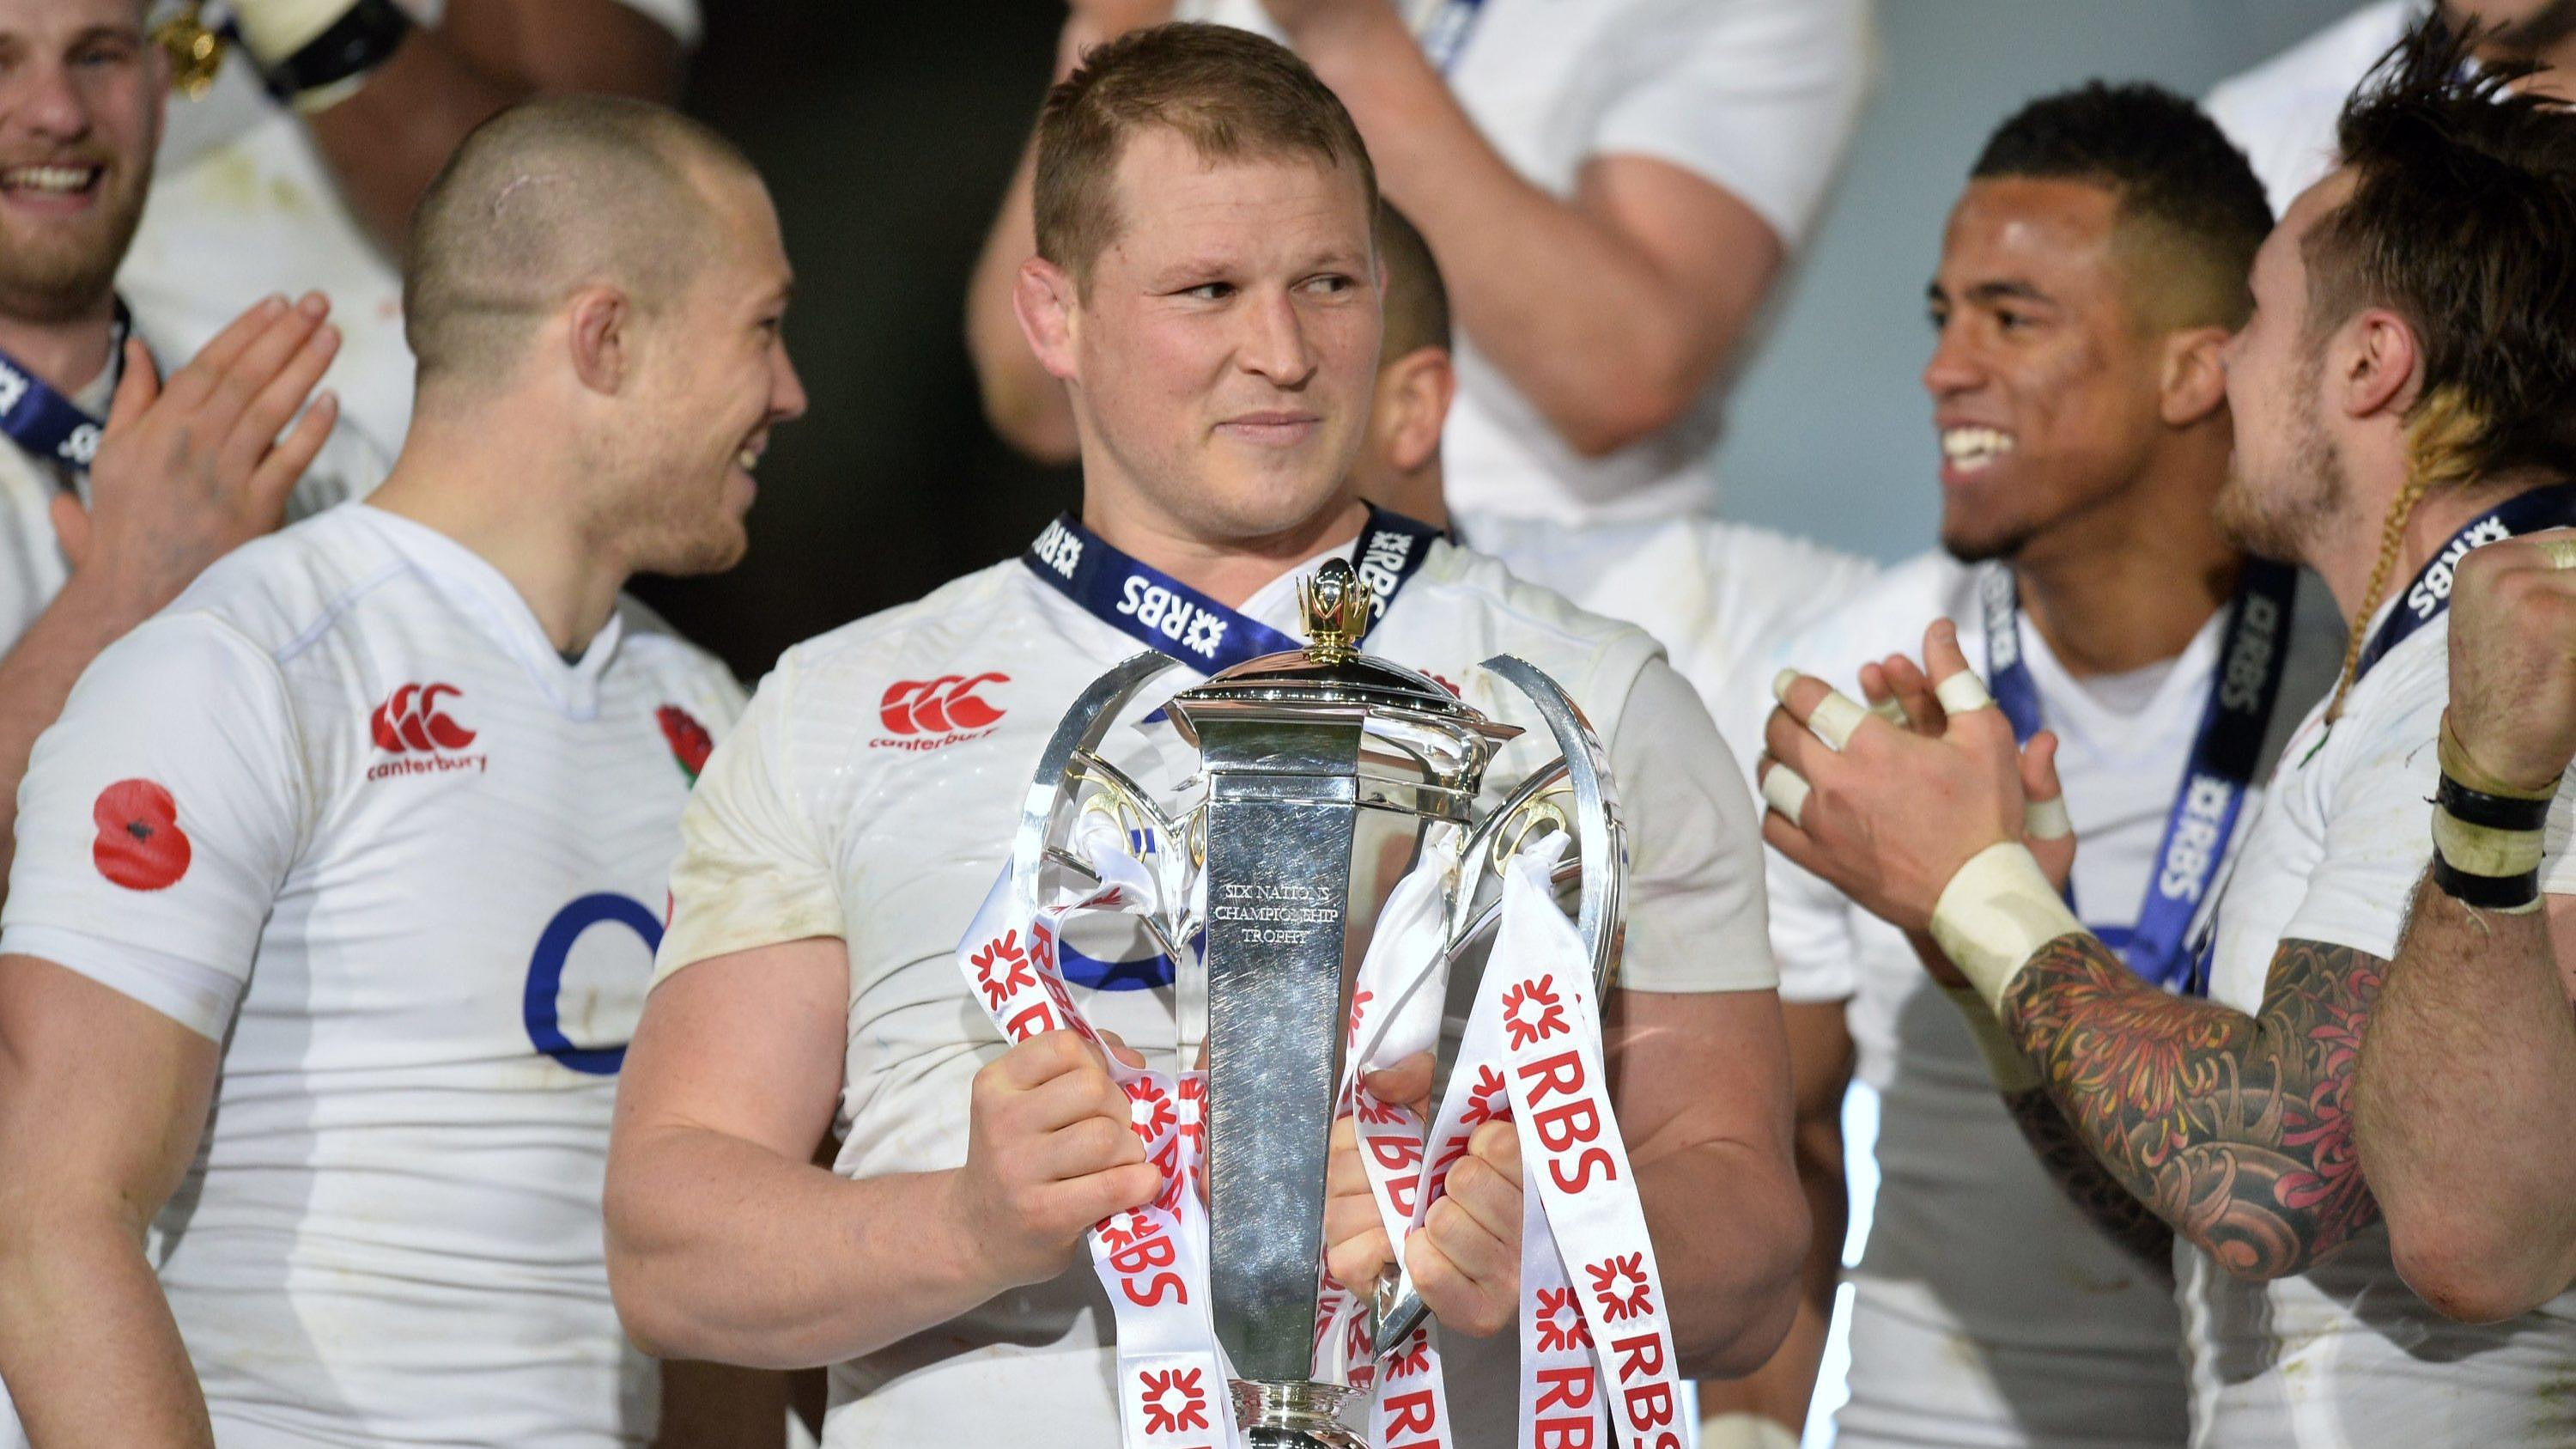 Six Nations: “From chaos can come light,” says former England captain Dylan Hartley